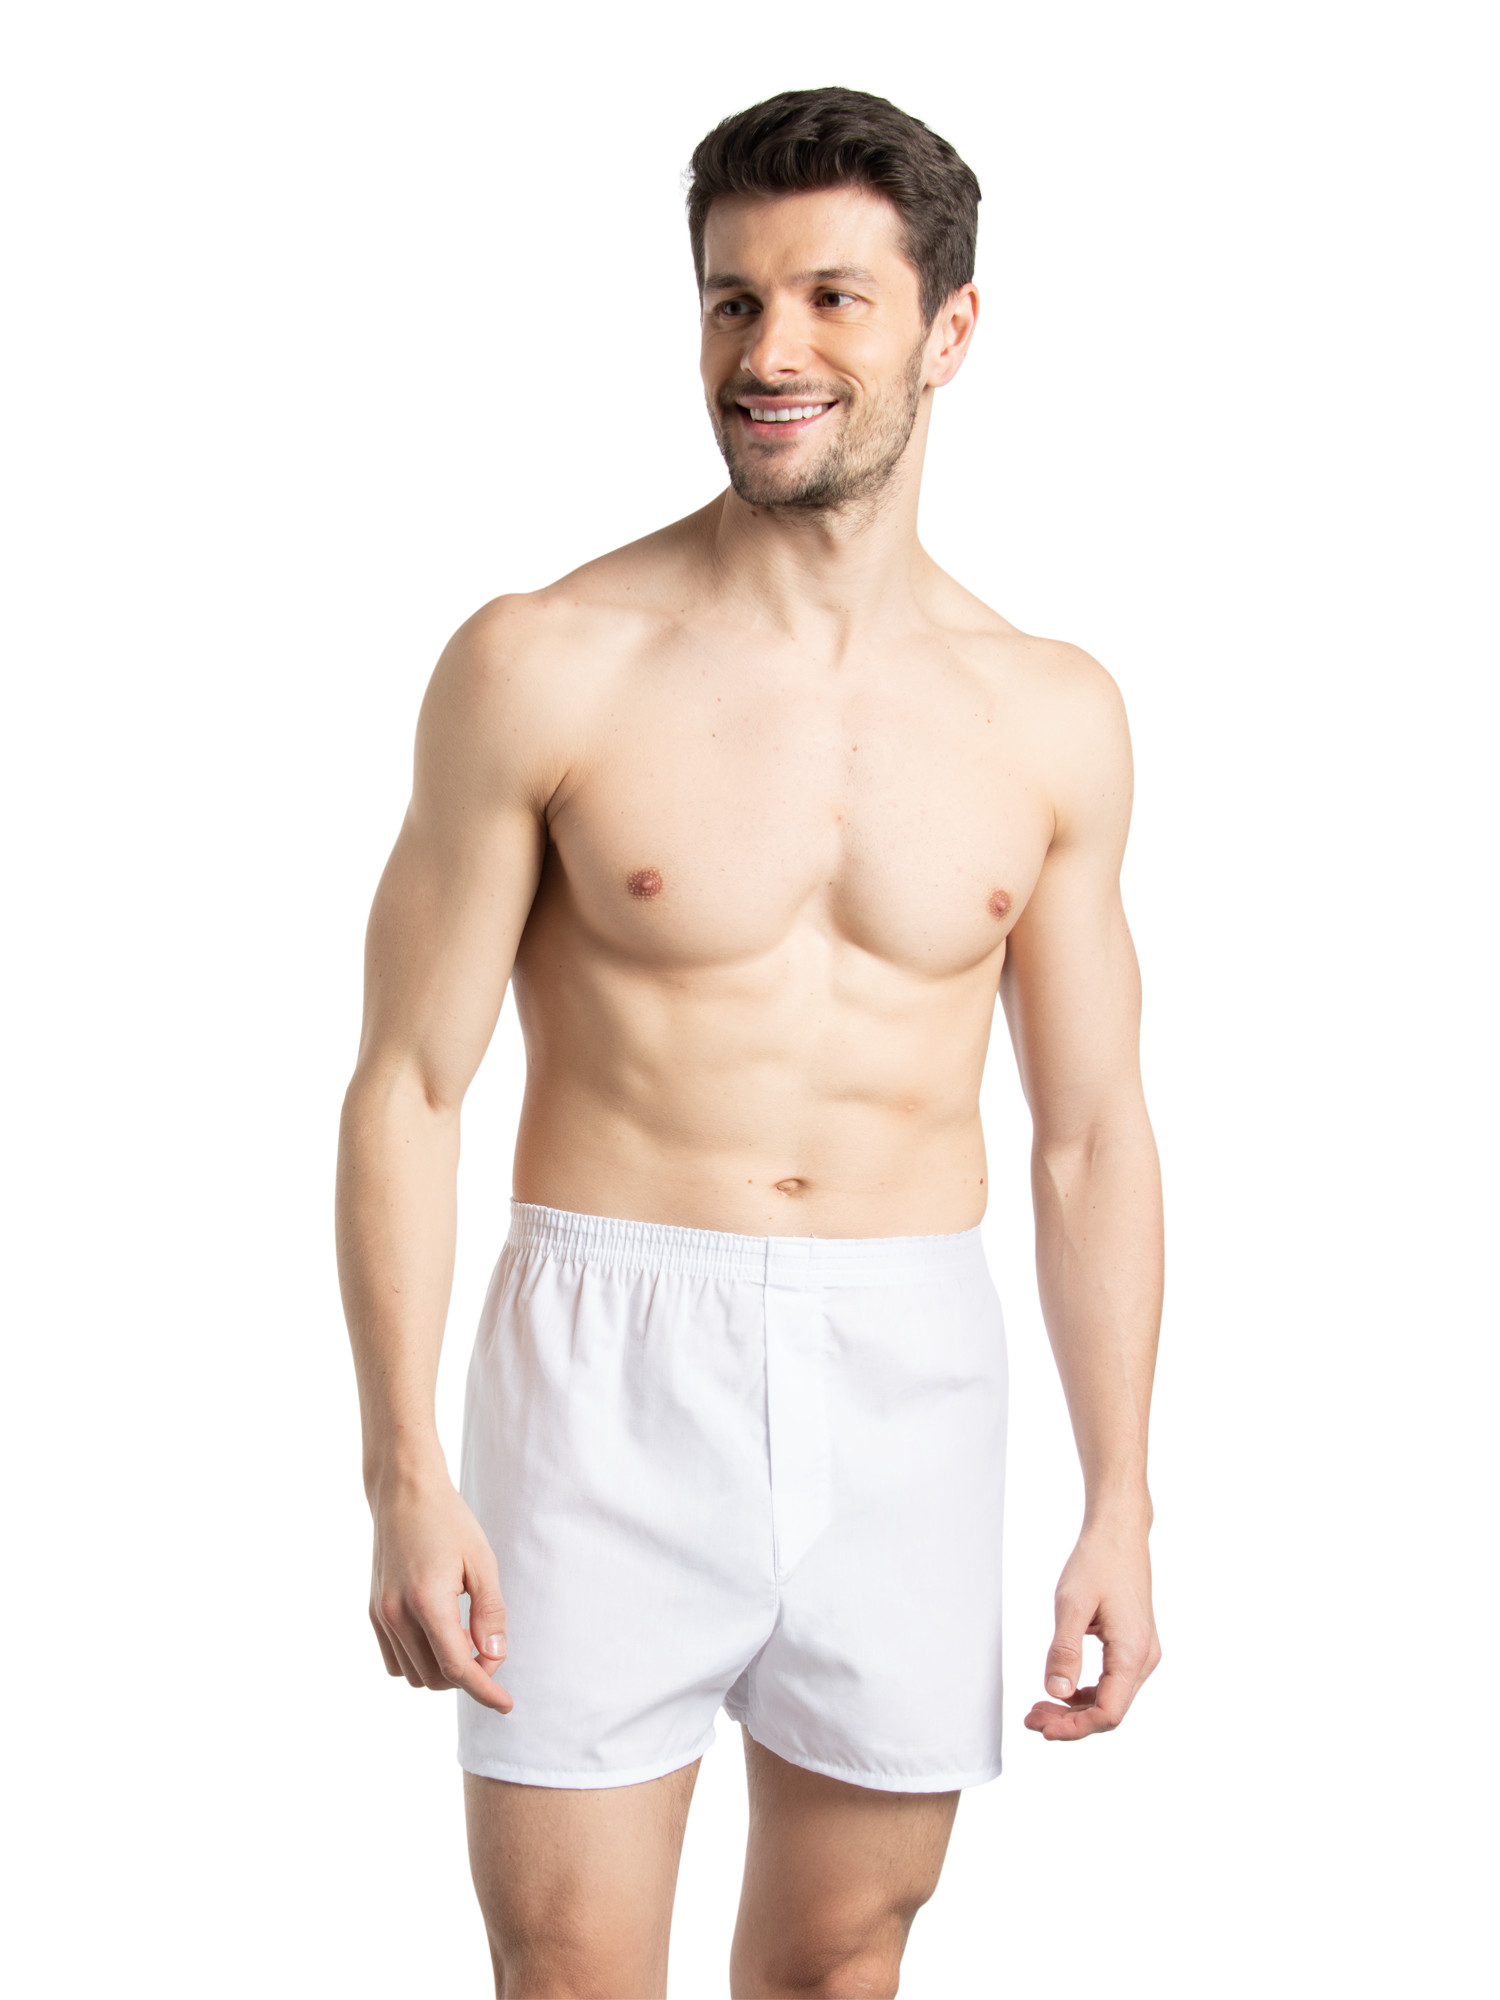 Fruit of the Loom Men's Woven Boxers, 5 Pack - image 3 of 10